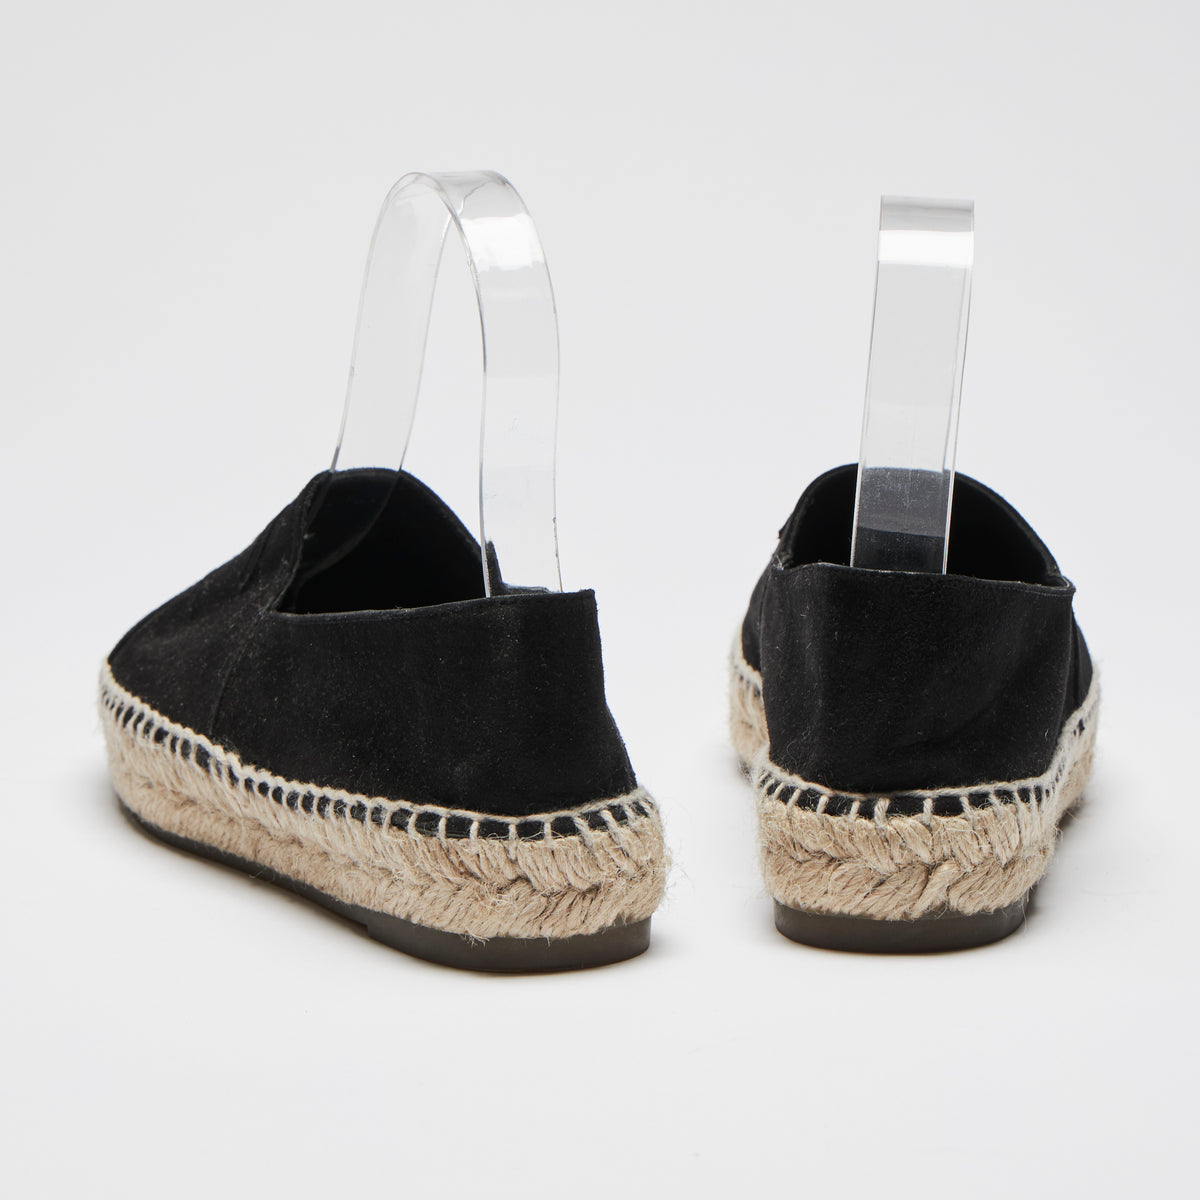 Excellent Pre-Loved Black Suede Espadrilles with Tonal Leather Lining. (back)